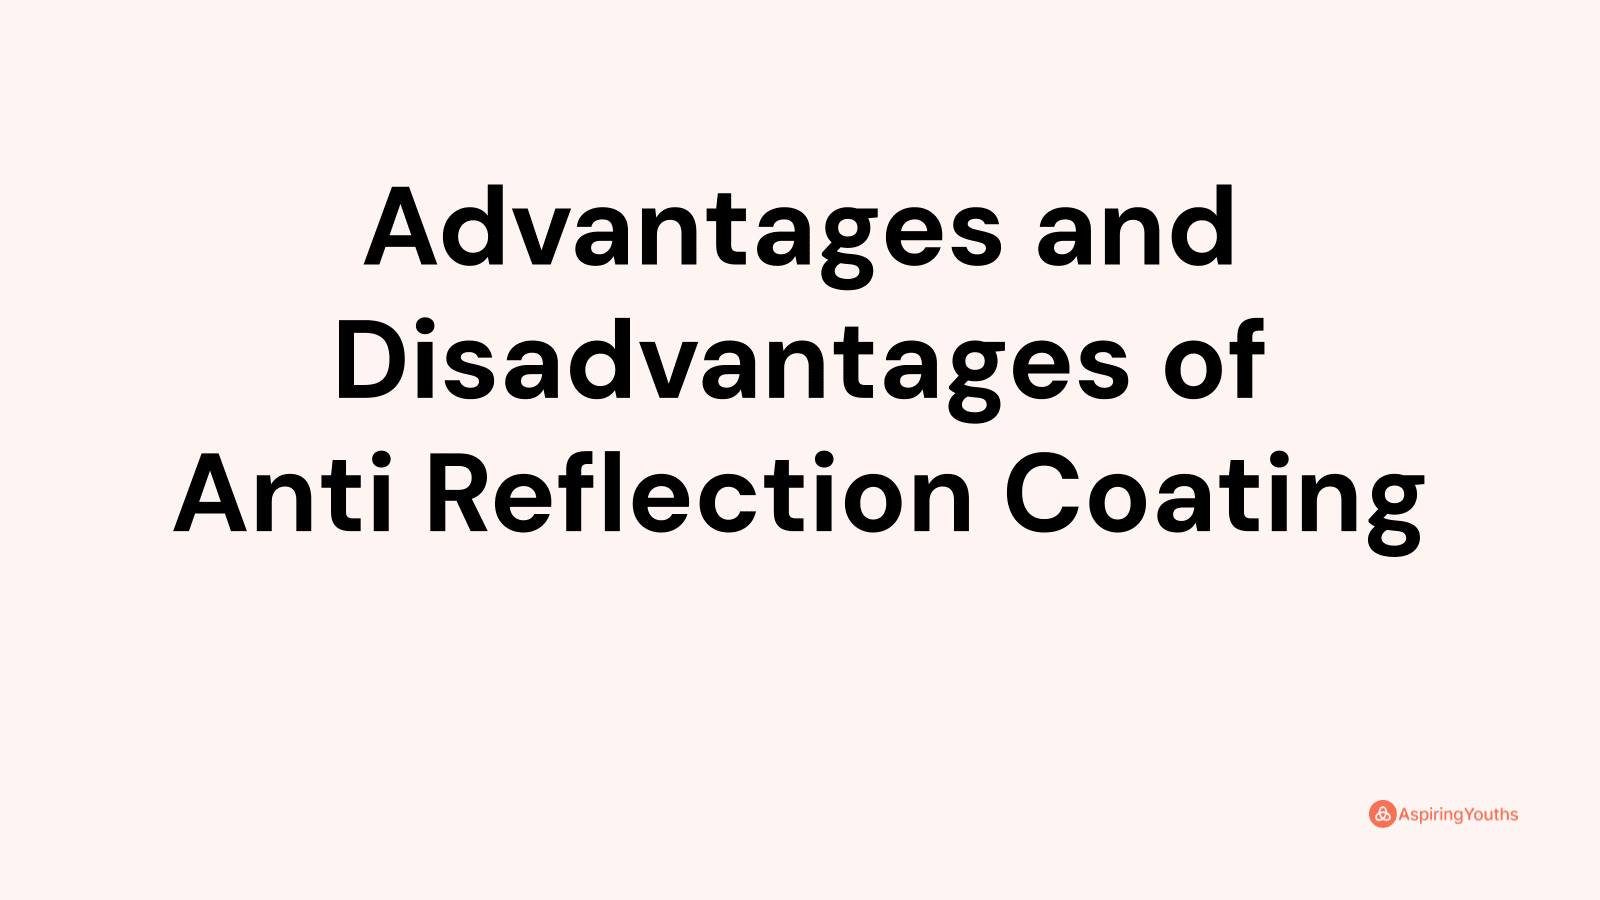 Advantages and disadvantages of Anti Reflection Coating